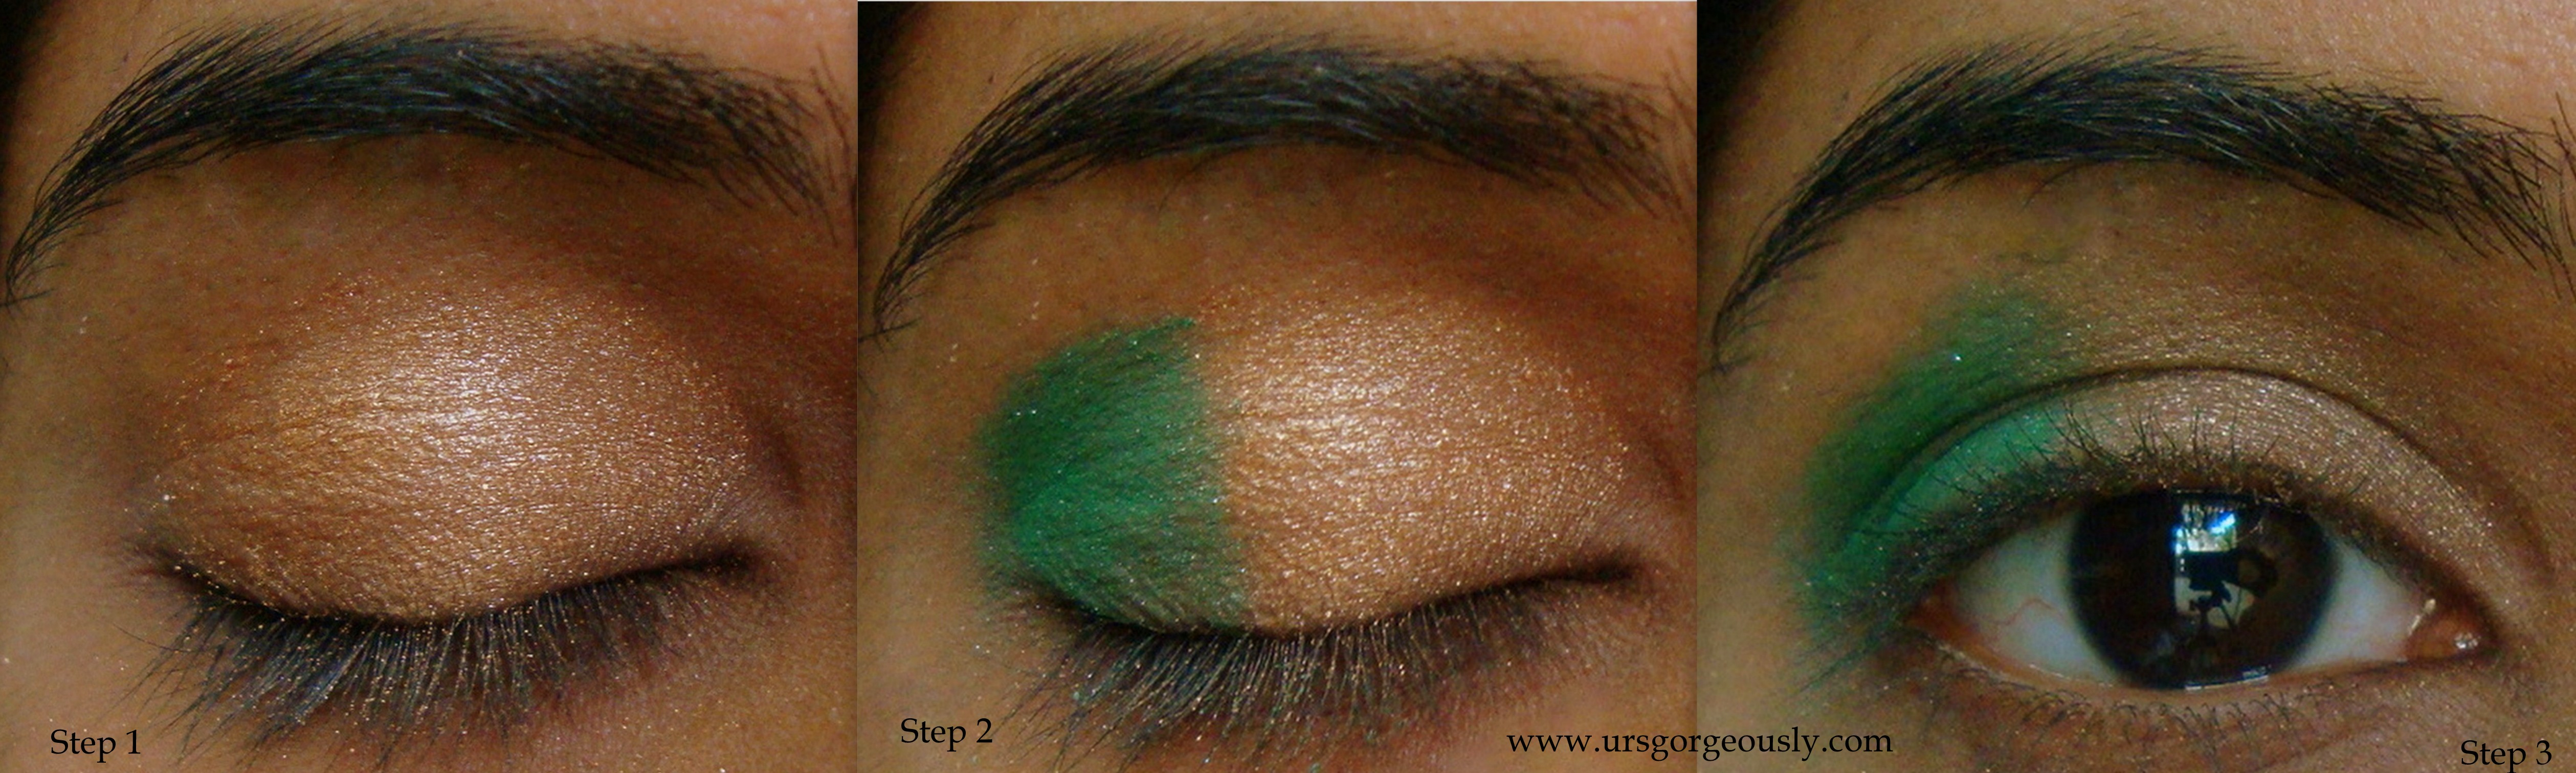 Gold Makeup For Green Eyes 6 Simple Steps For A Gold And Green Eye Makeup Tutorial Ursgorgeously